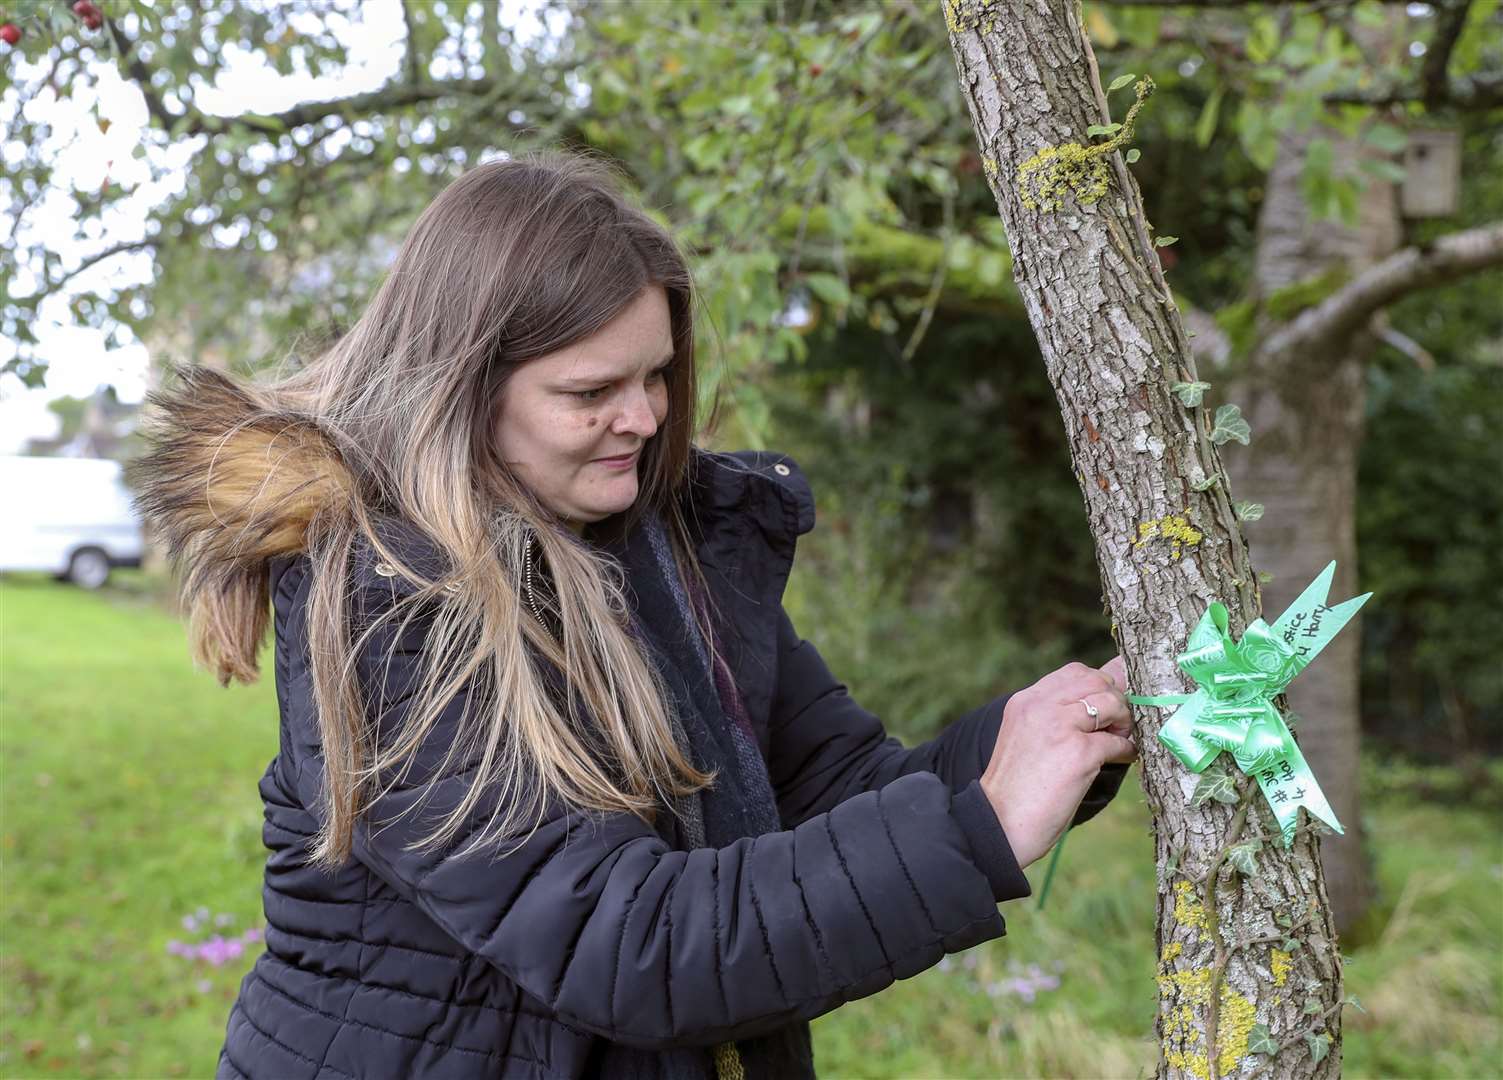 Harry Dunn’s aunt, Katie Grant, ties green ribbons around a tree in his memory (Steve Parsons/PA)